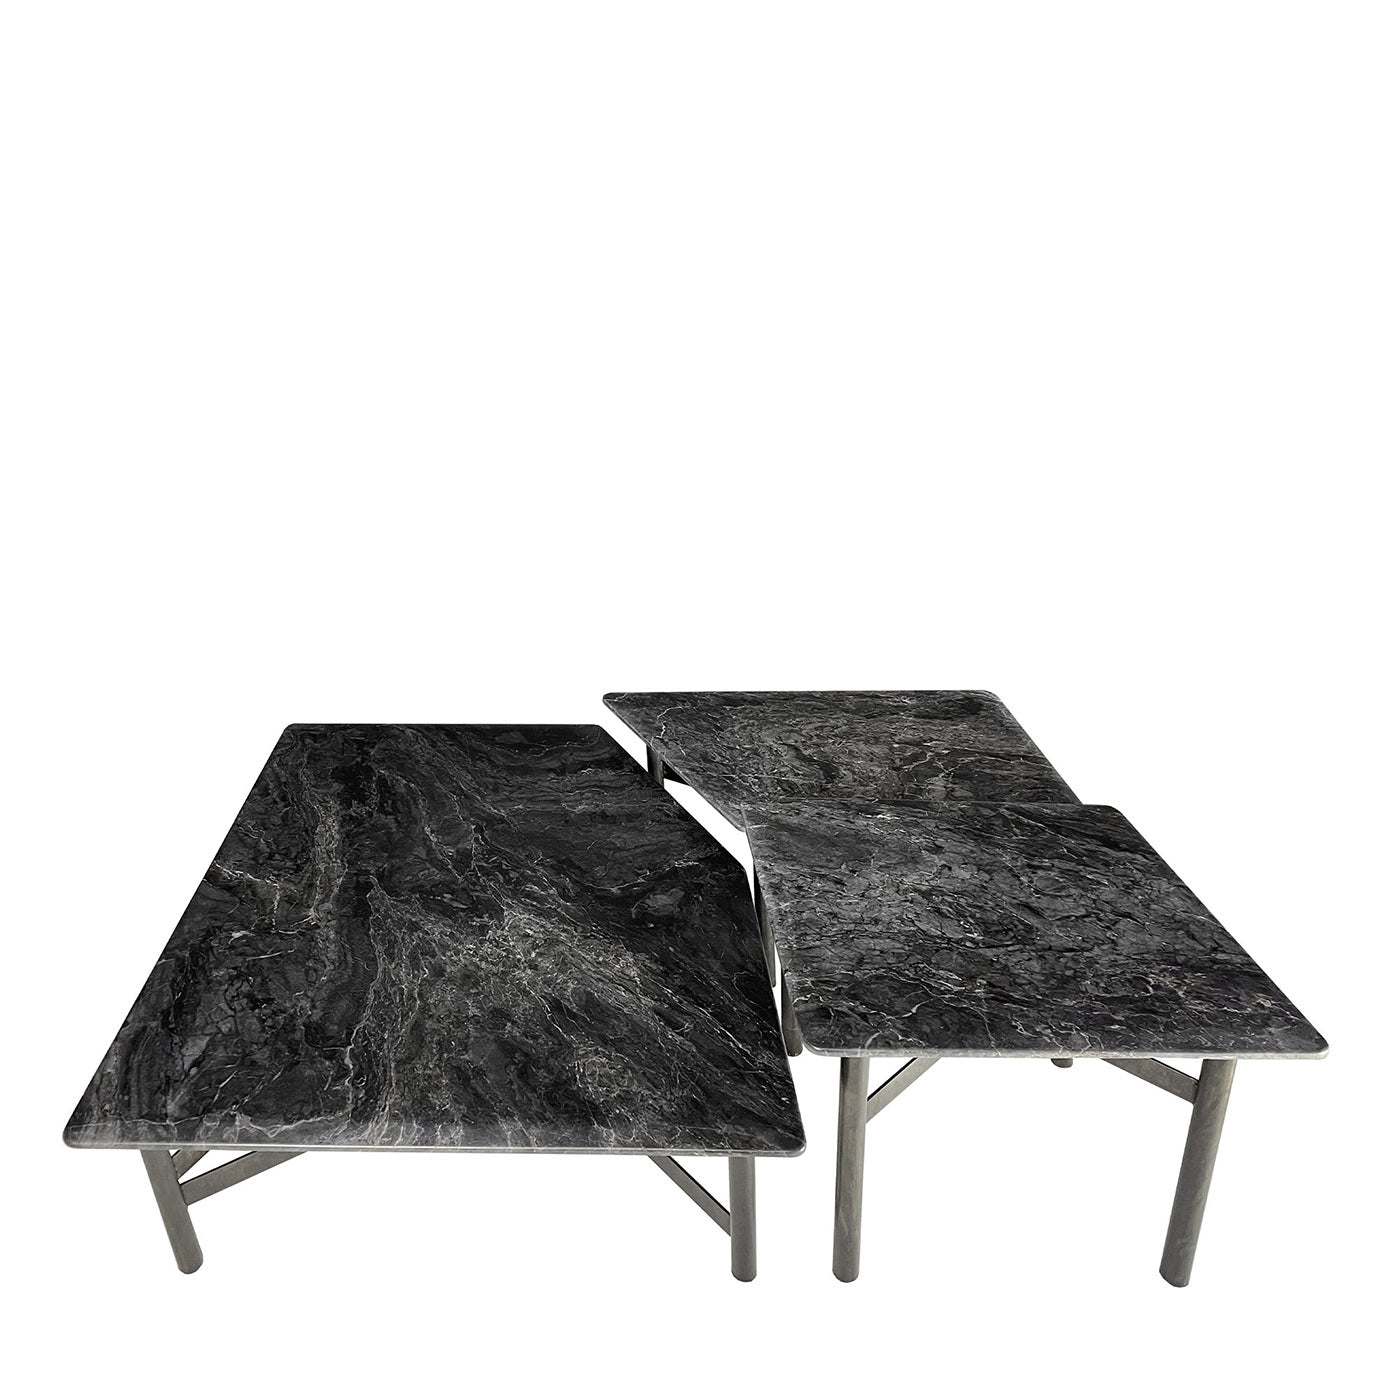 Eneolitica Twins Set of 3 Coffee Tables - Main view